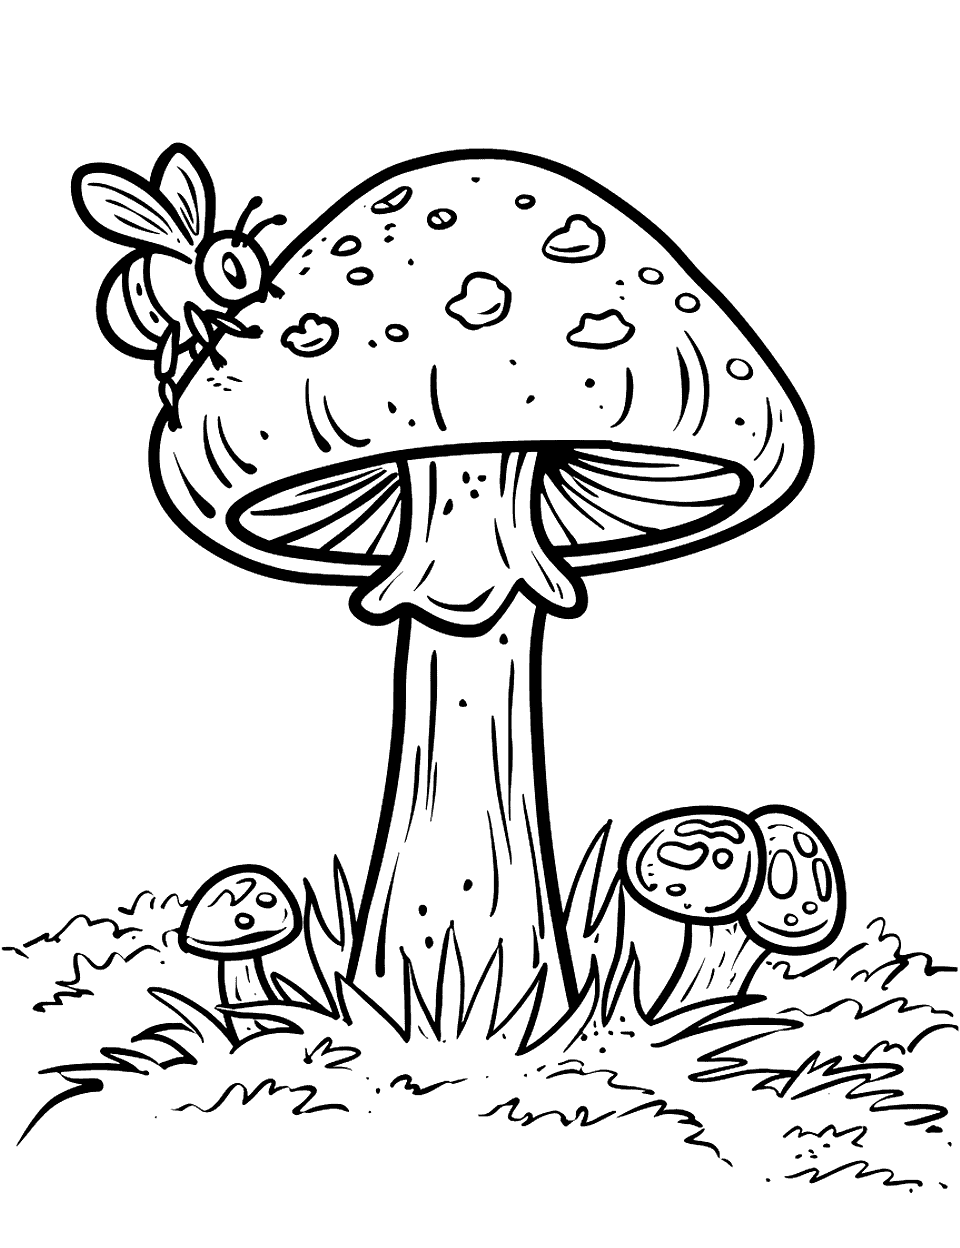 Bee Landing on a Mushroom Coloring Page - A bee lands delicately on the edge of a mushroom cap.